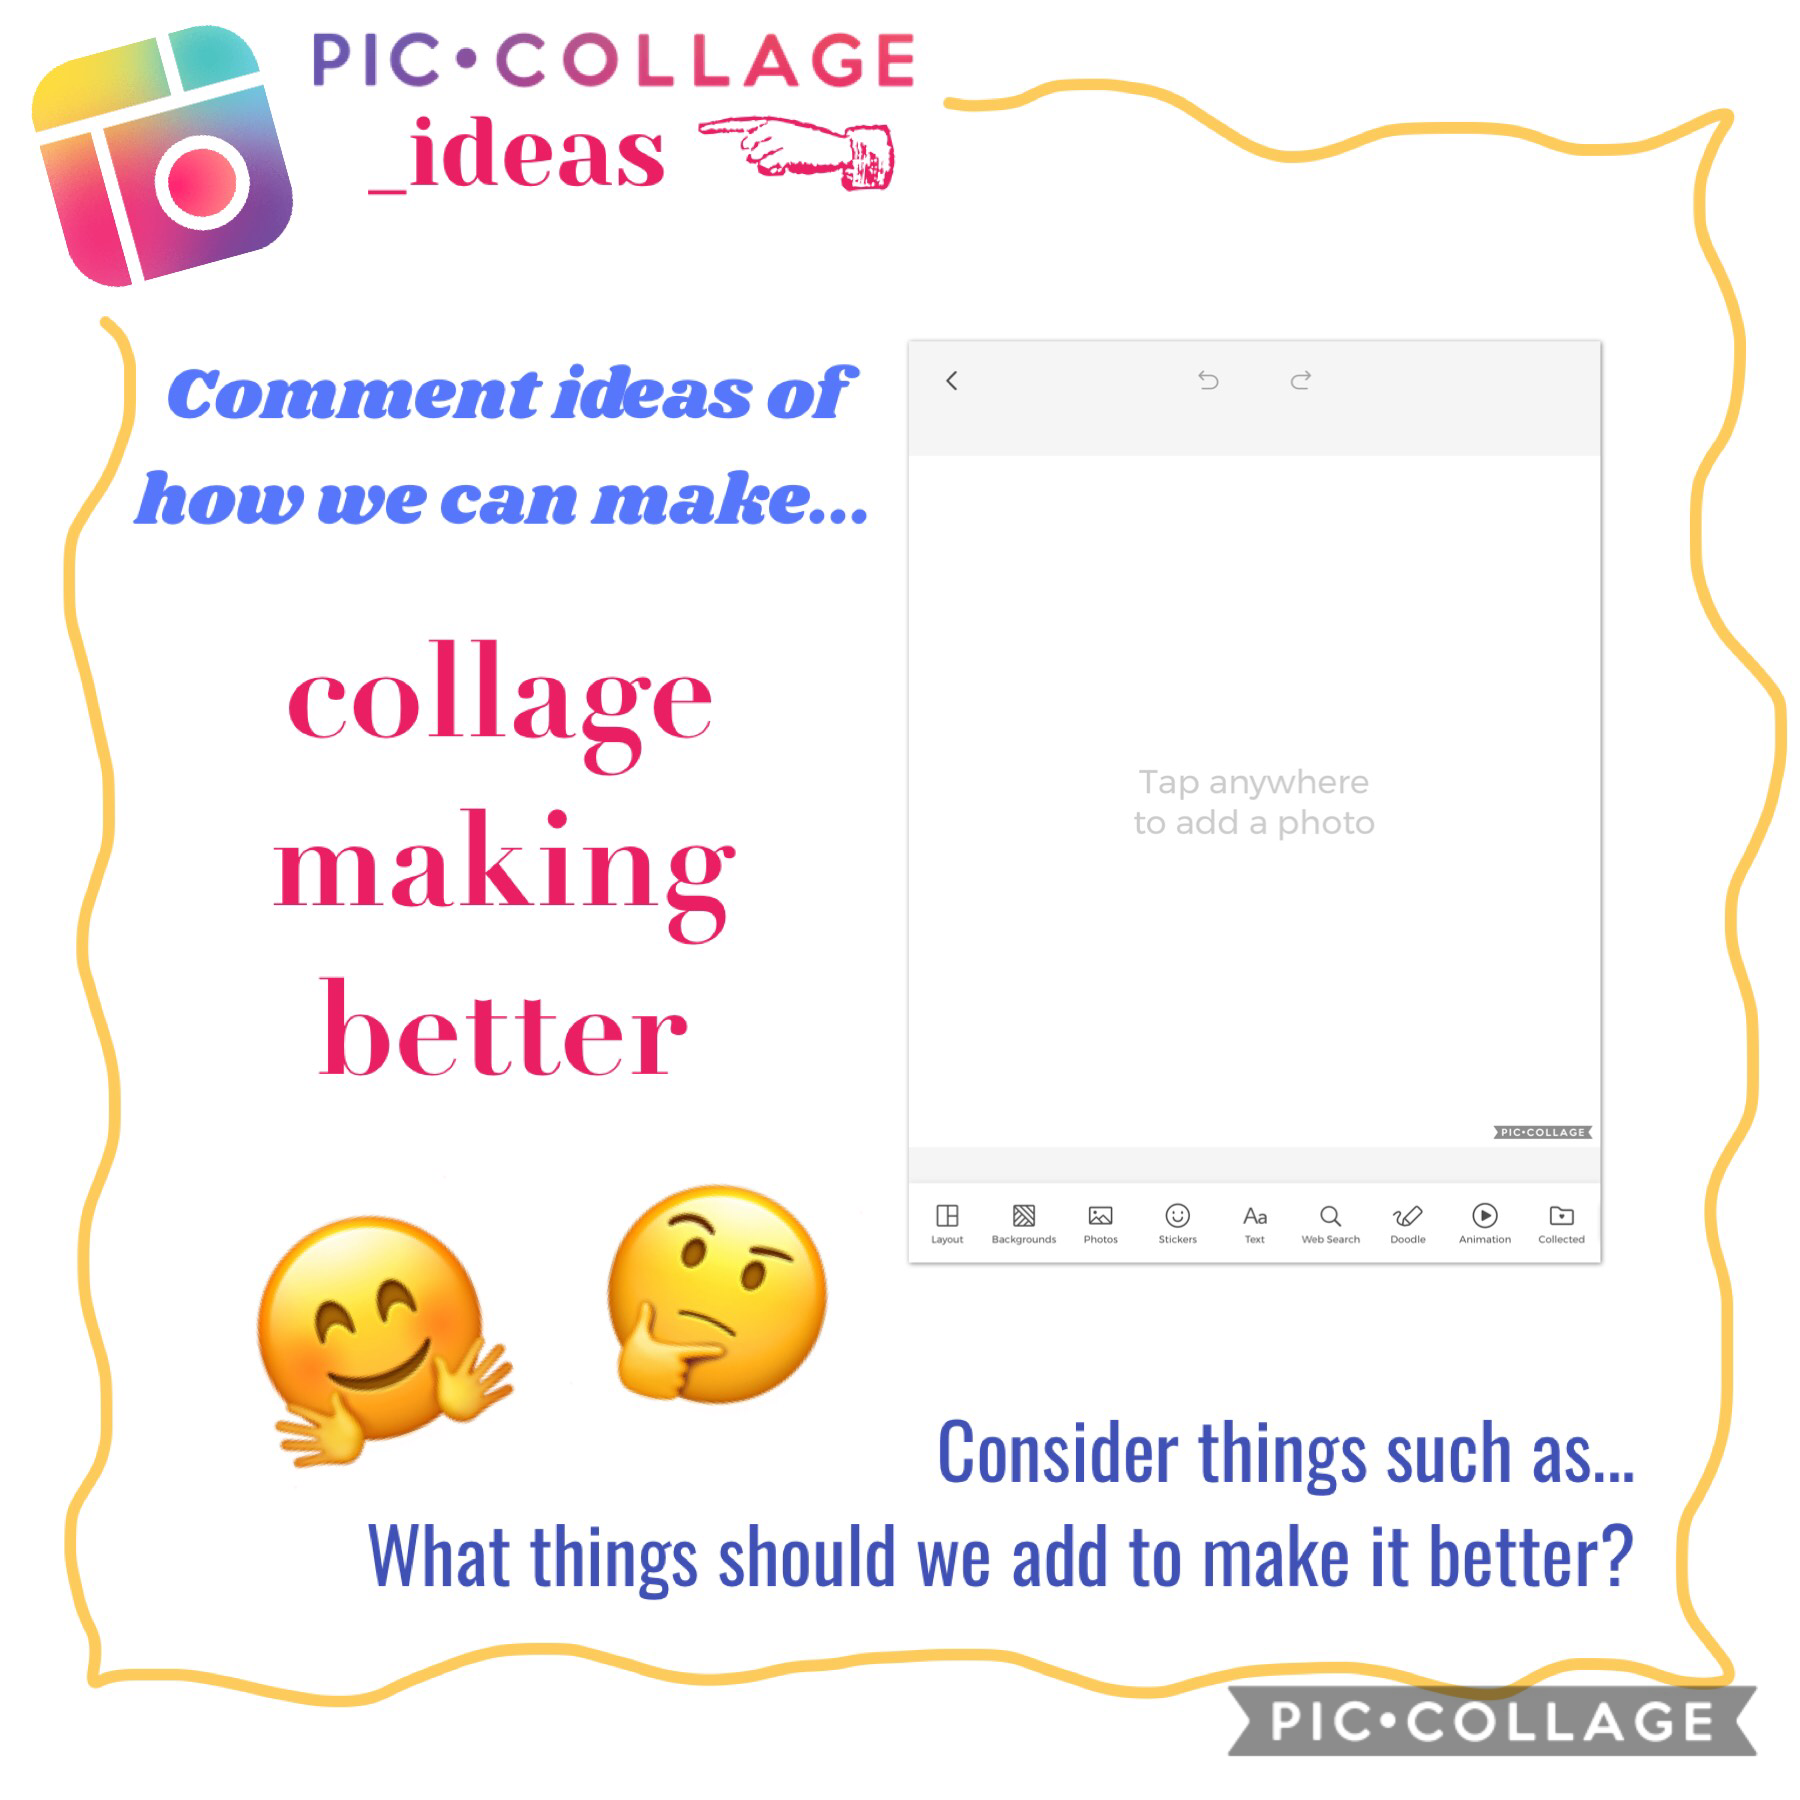 How can we make collage making better?